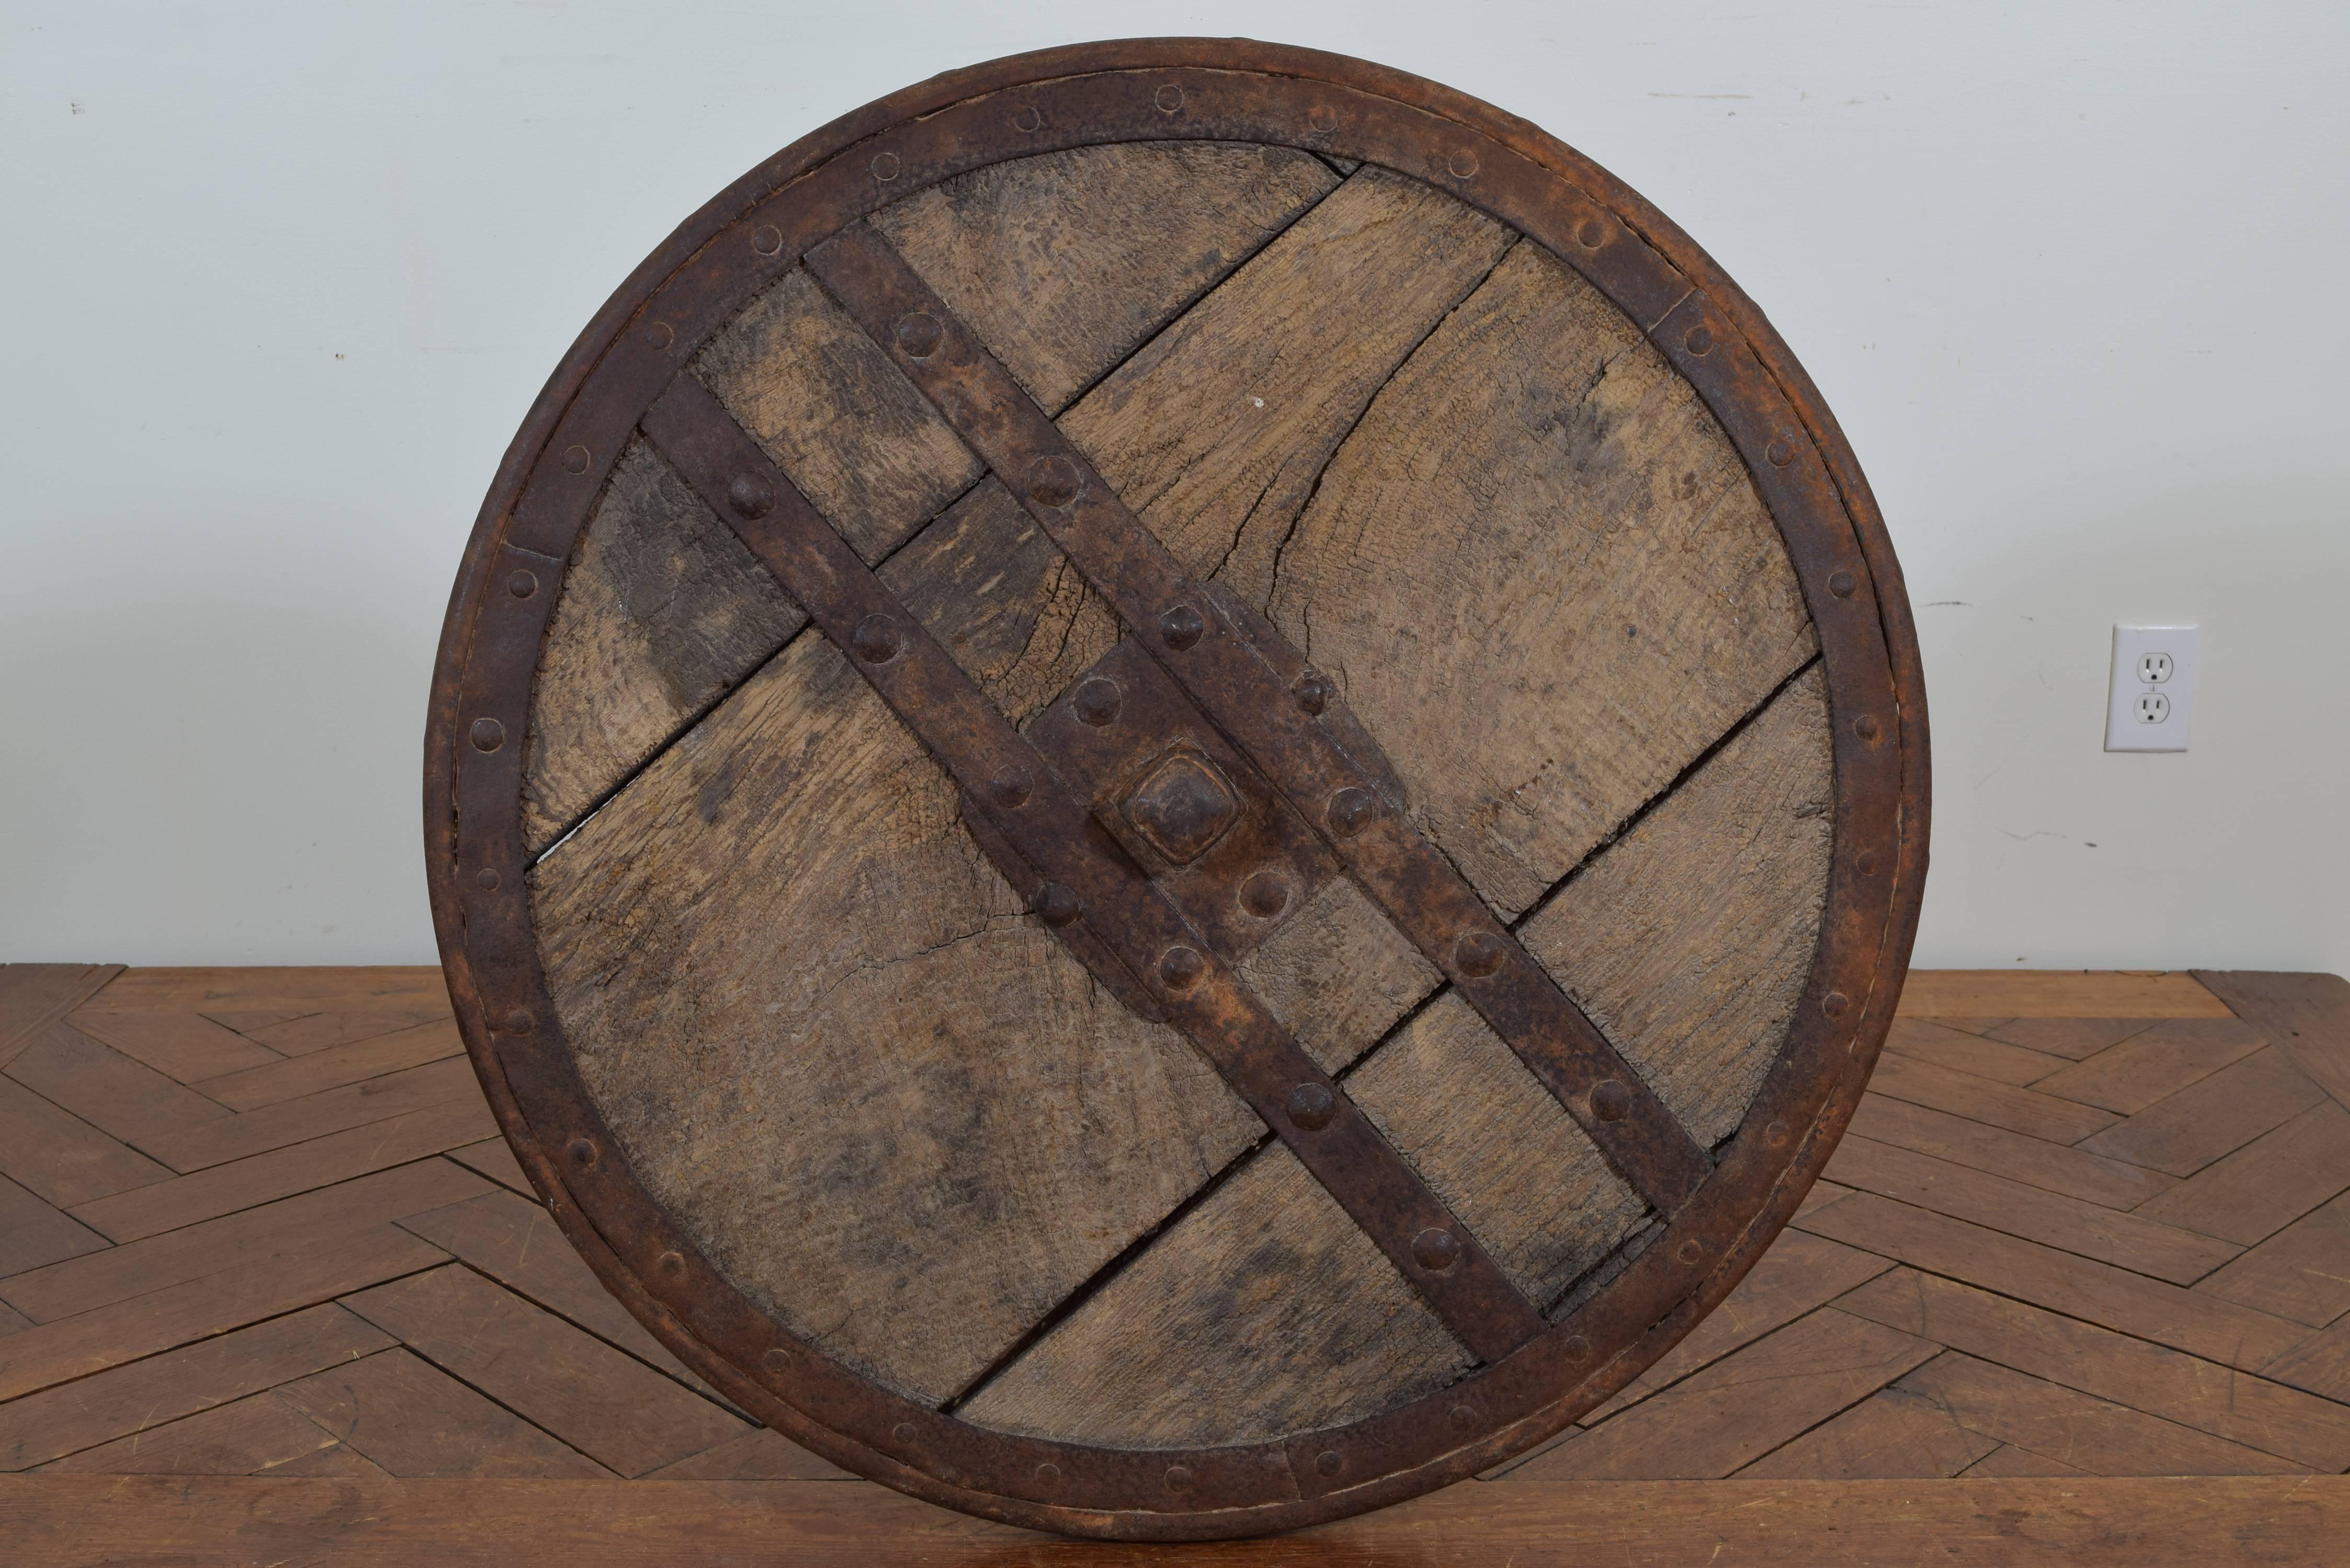 The wooden top with an iron band and iron braces bisecting it, raised section in center of top is 2